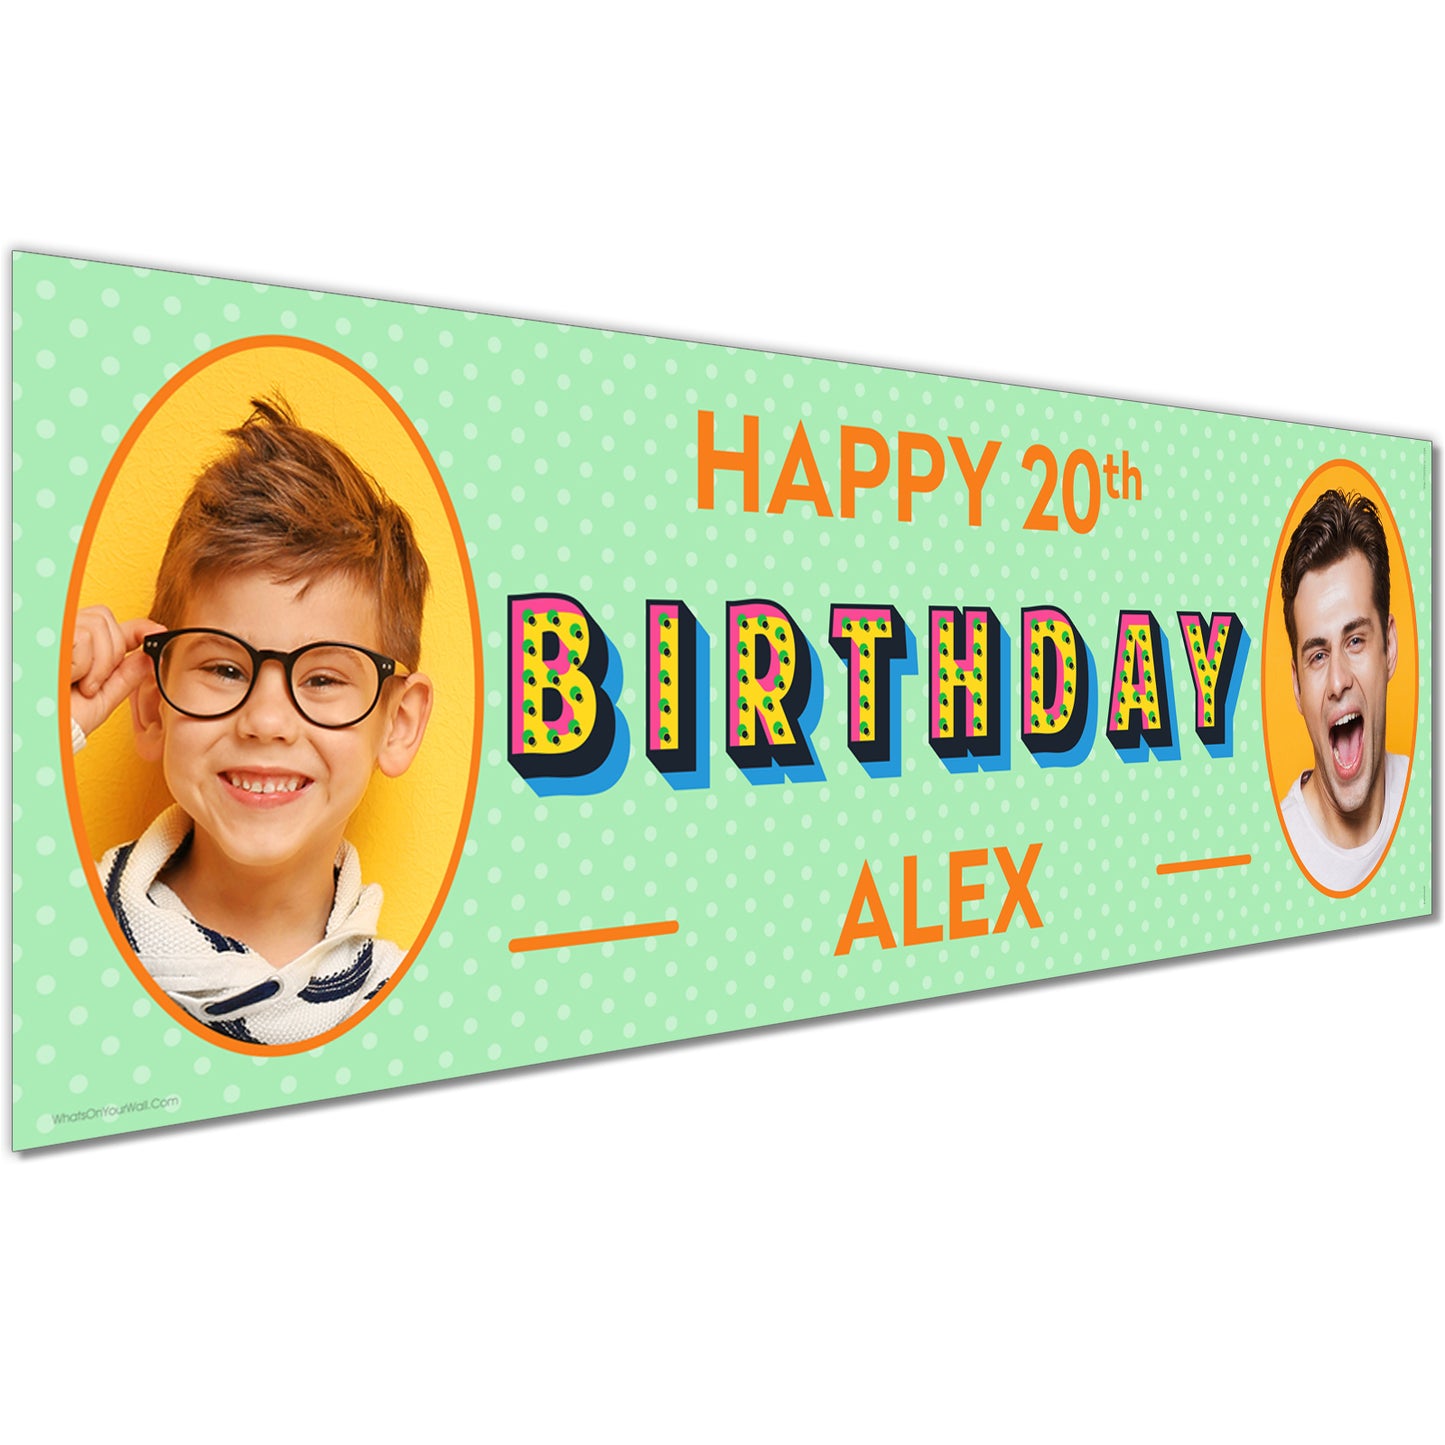 Personalised Birthday Banners in Polka Dots Green Design